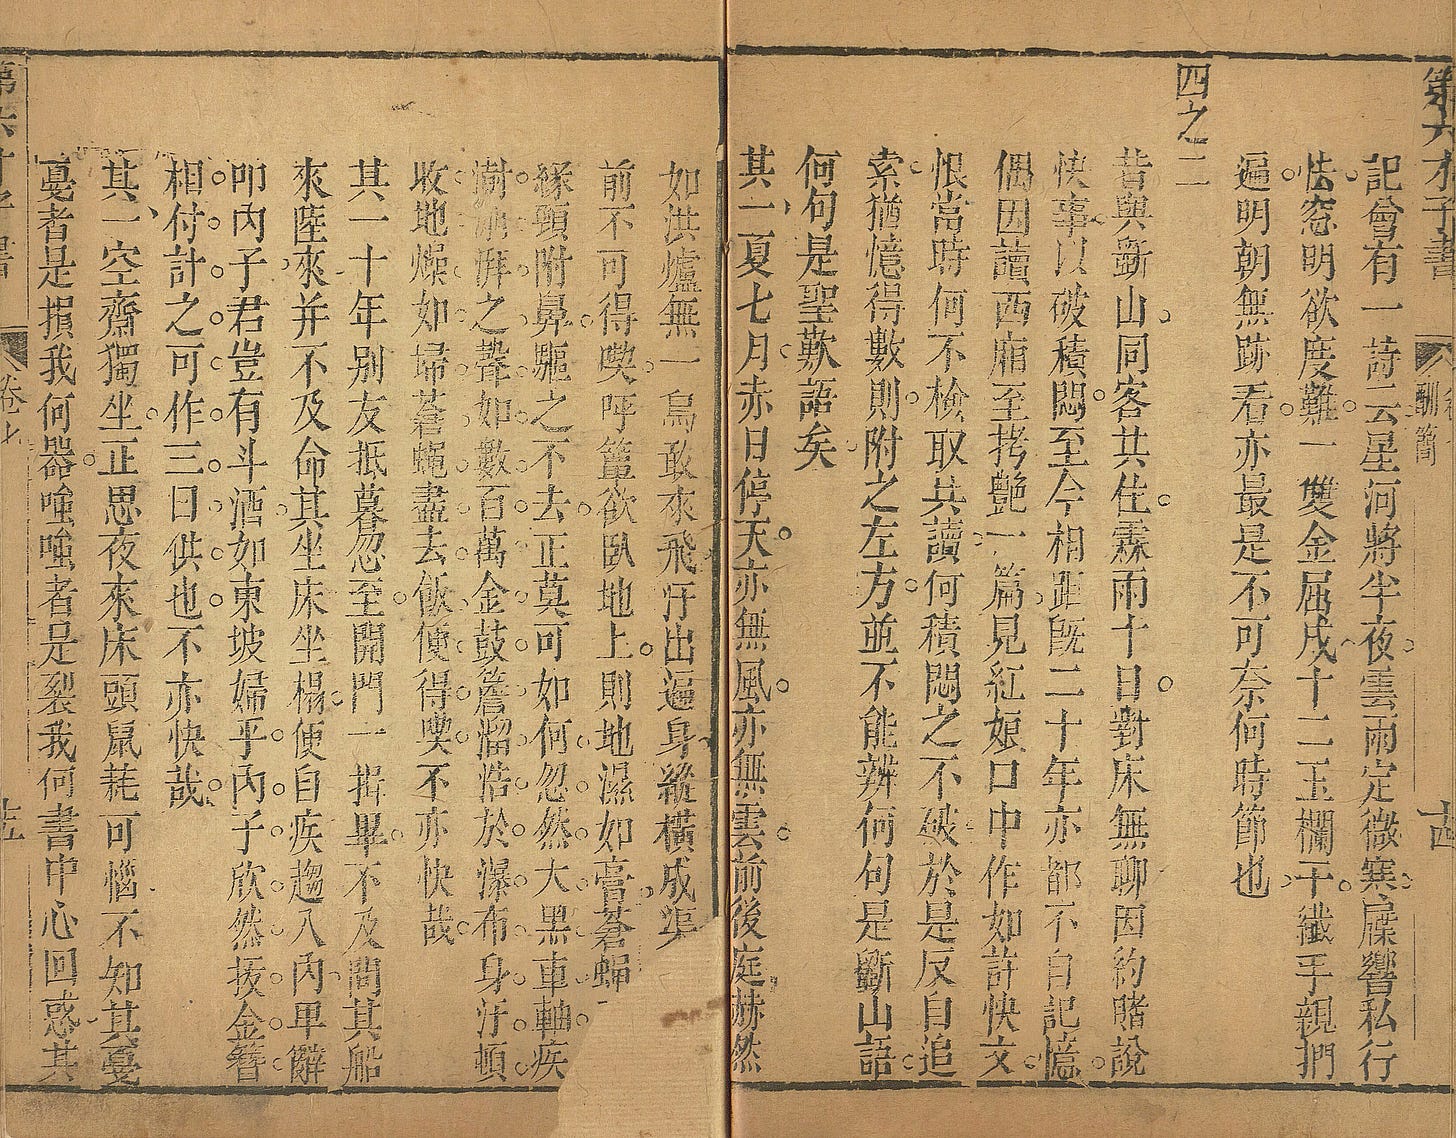 A scan of the Jinguyuan edition of Jin Shengtan's version of The Romance of the Western Chamber, open to the pages translated here